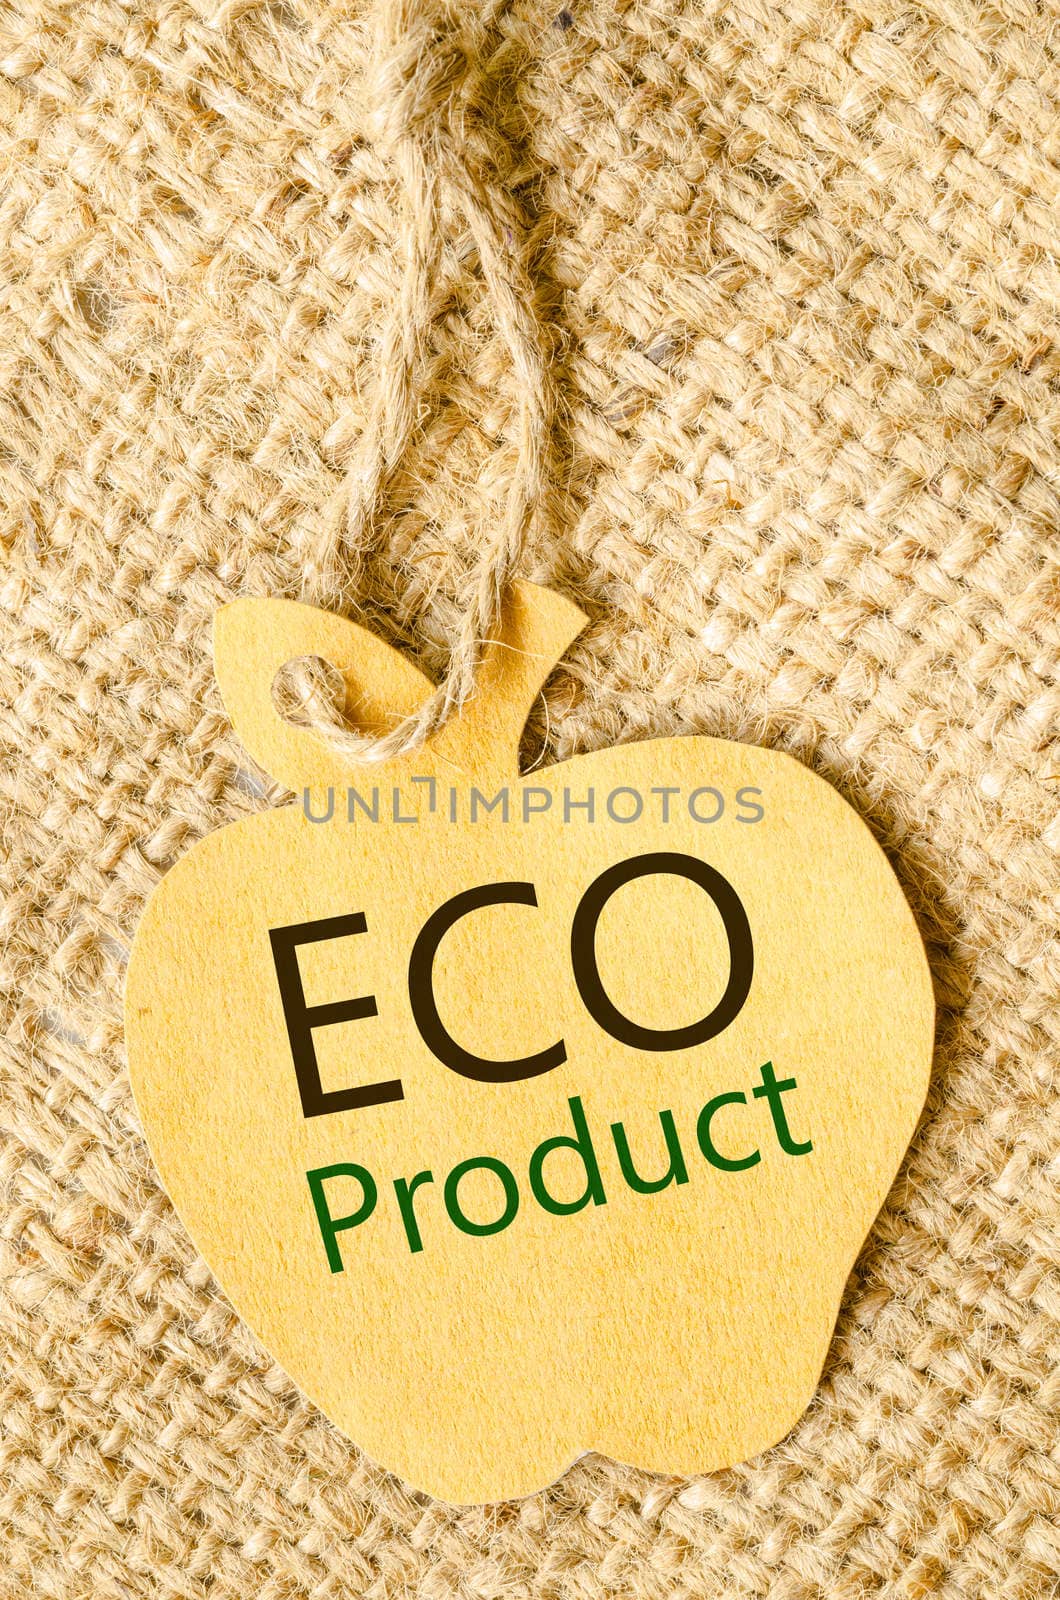 ECO product. by Gamjai